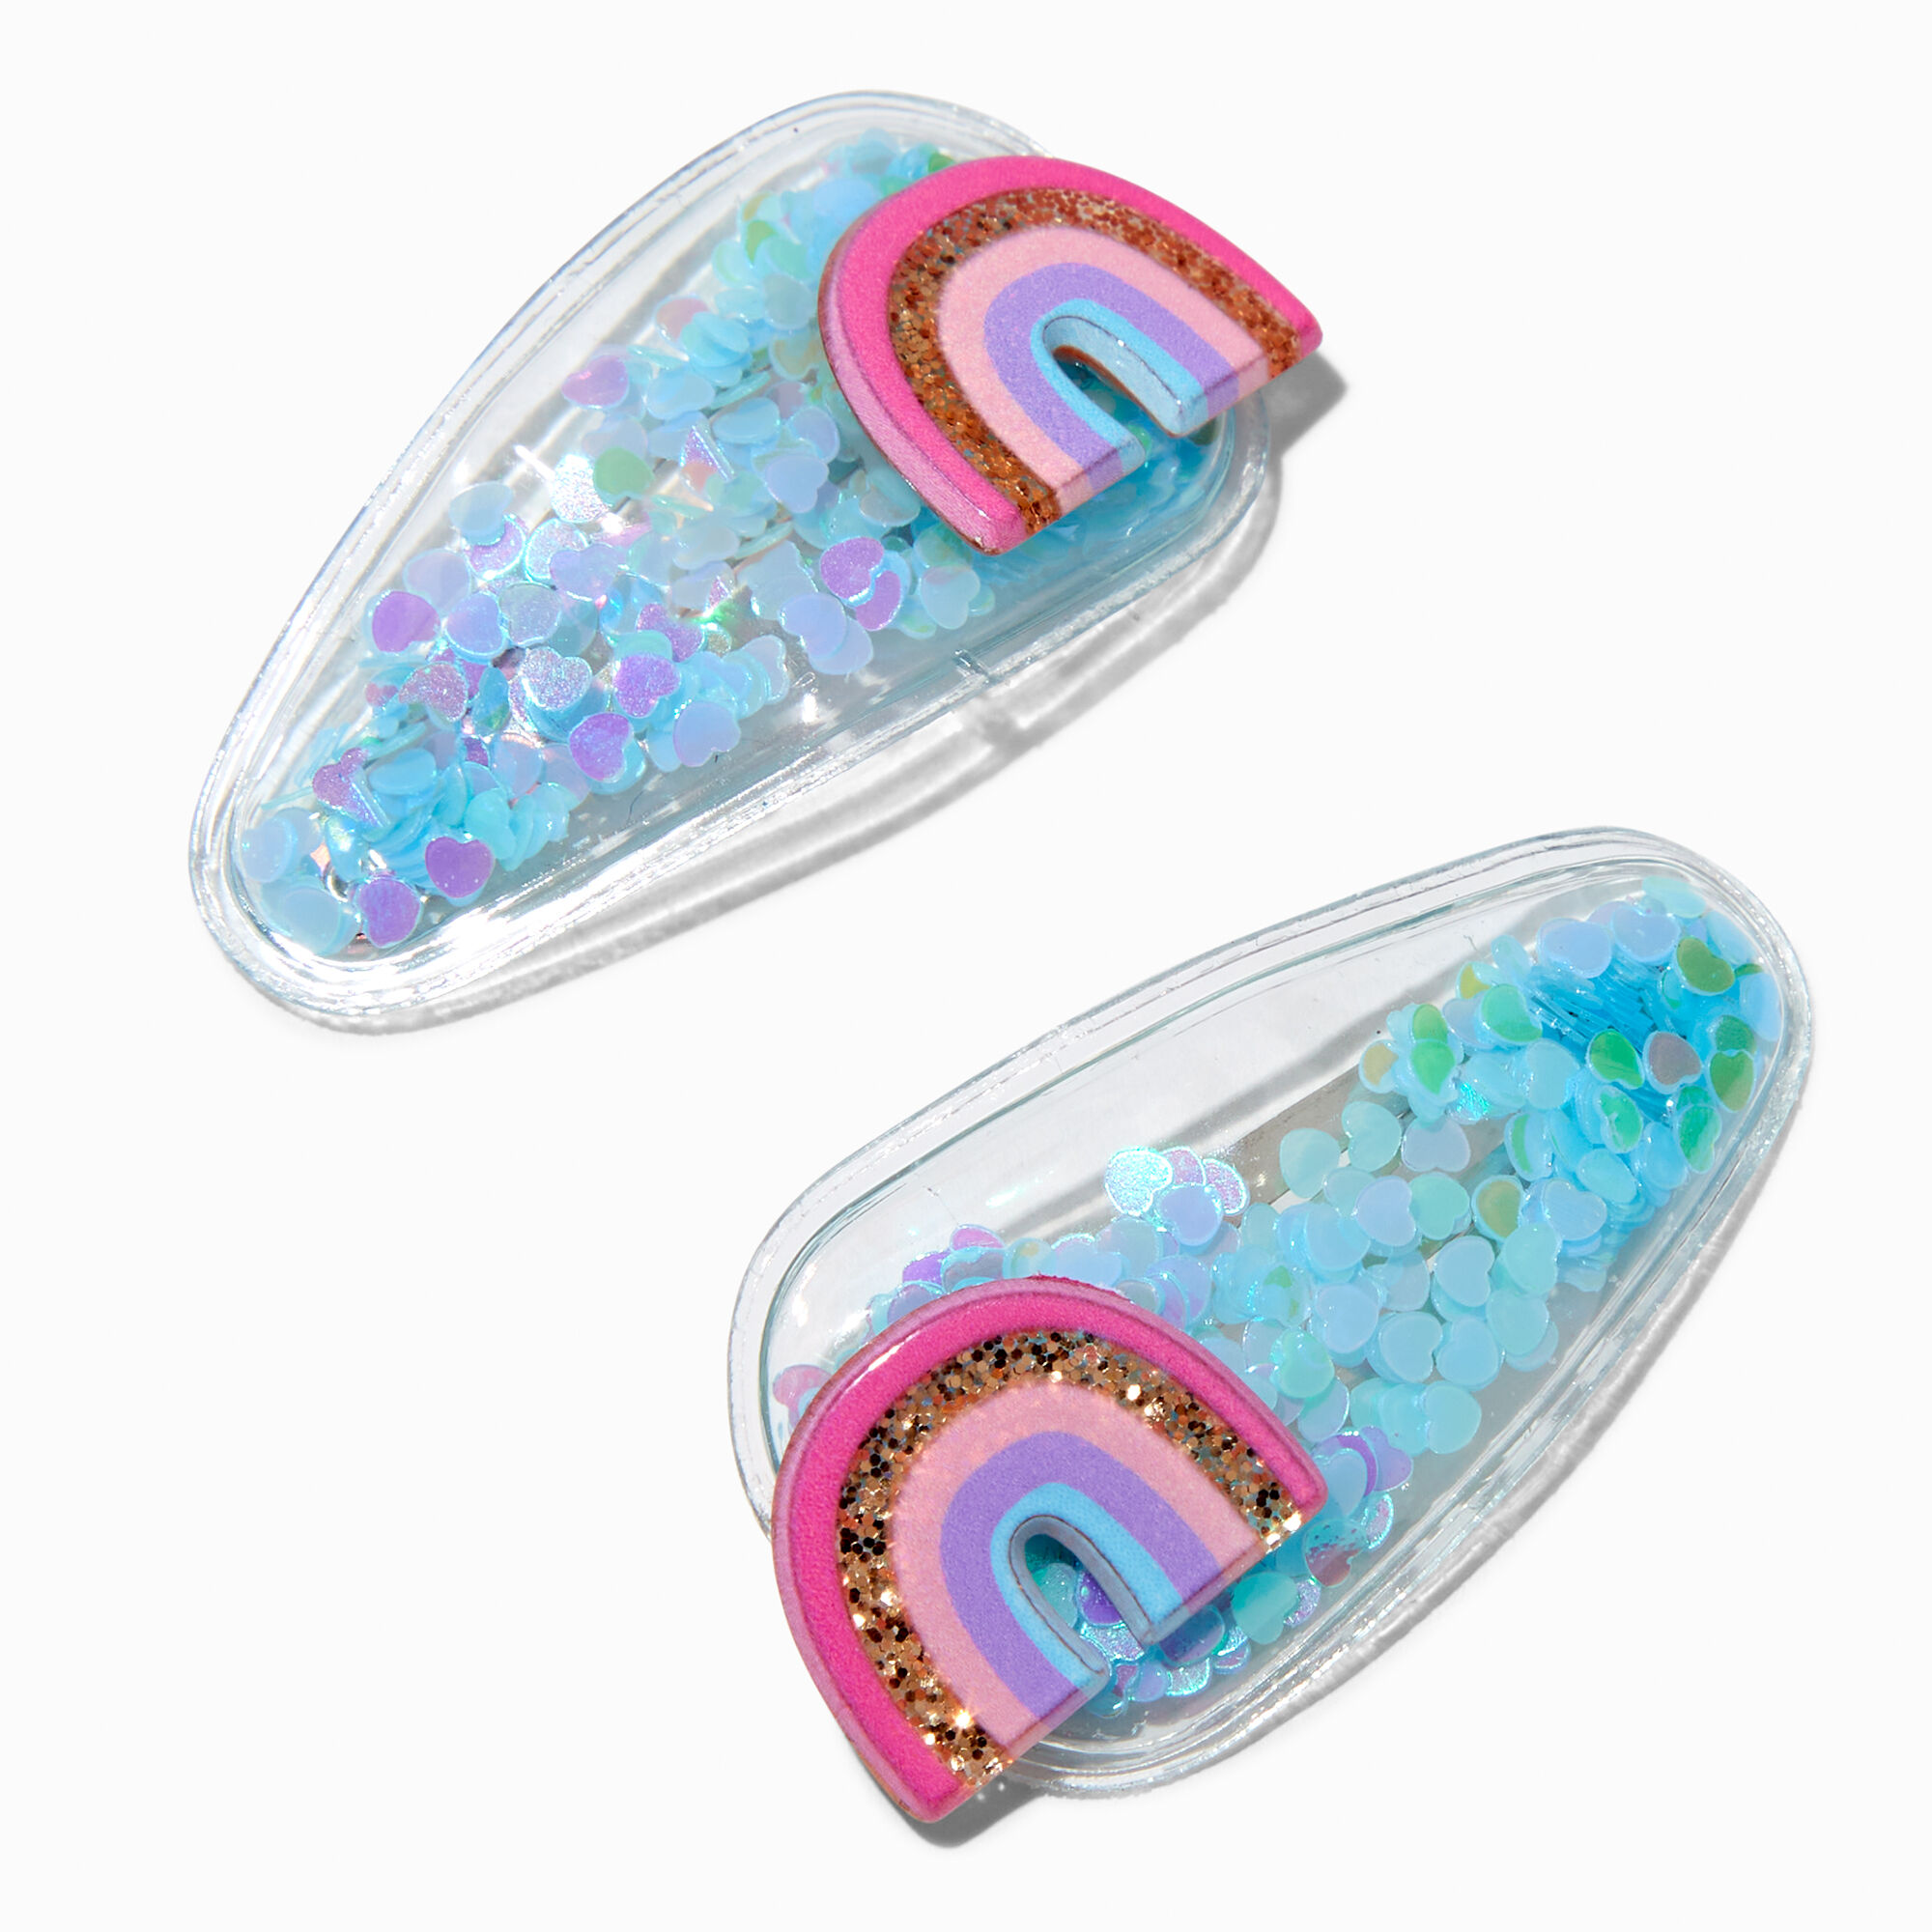 View Claires Club Shaker Snap Hair Clips 2 Pack Rainbow information